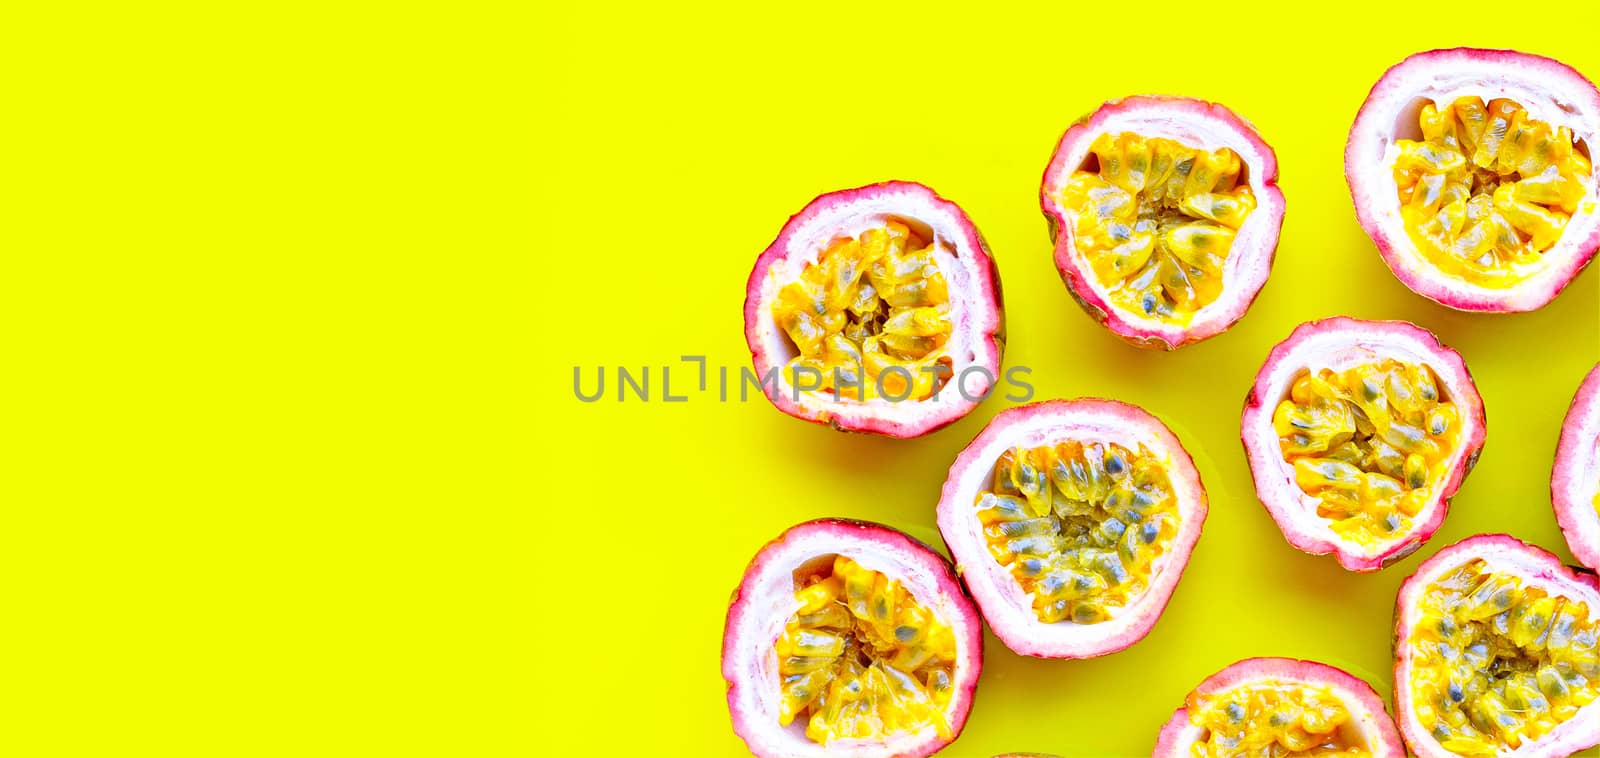 Passion fruit on yellow background.  by Bowonpat